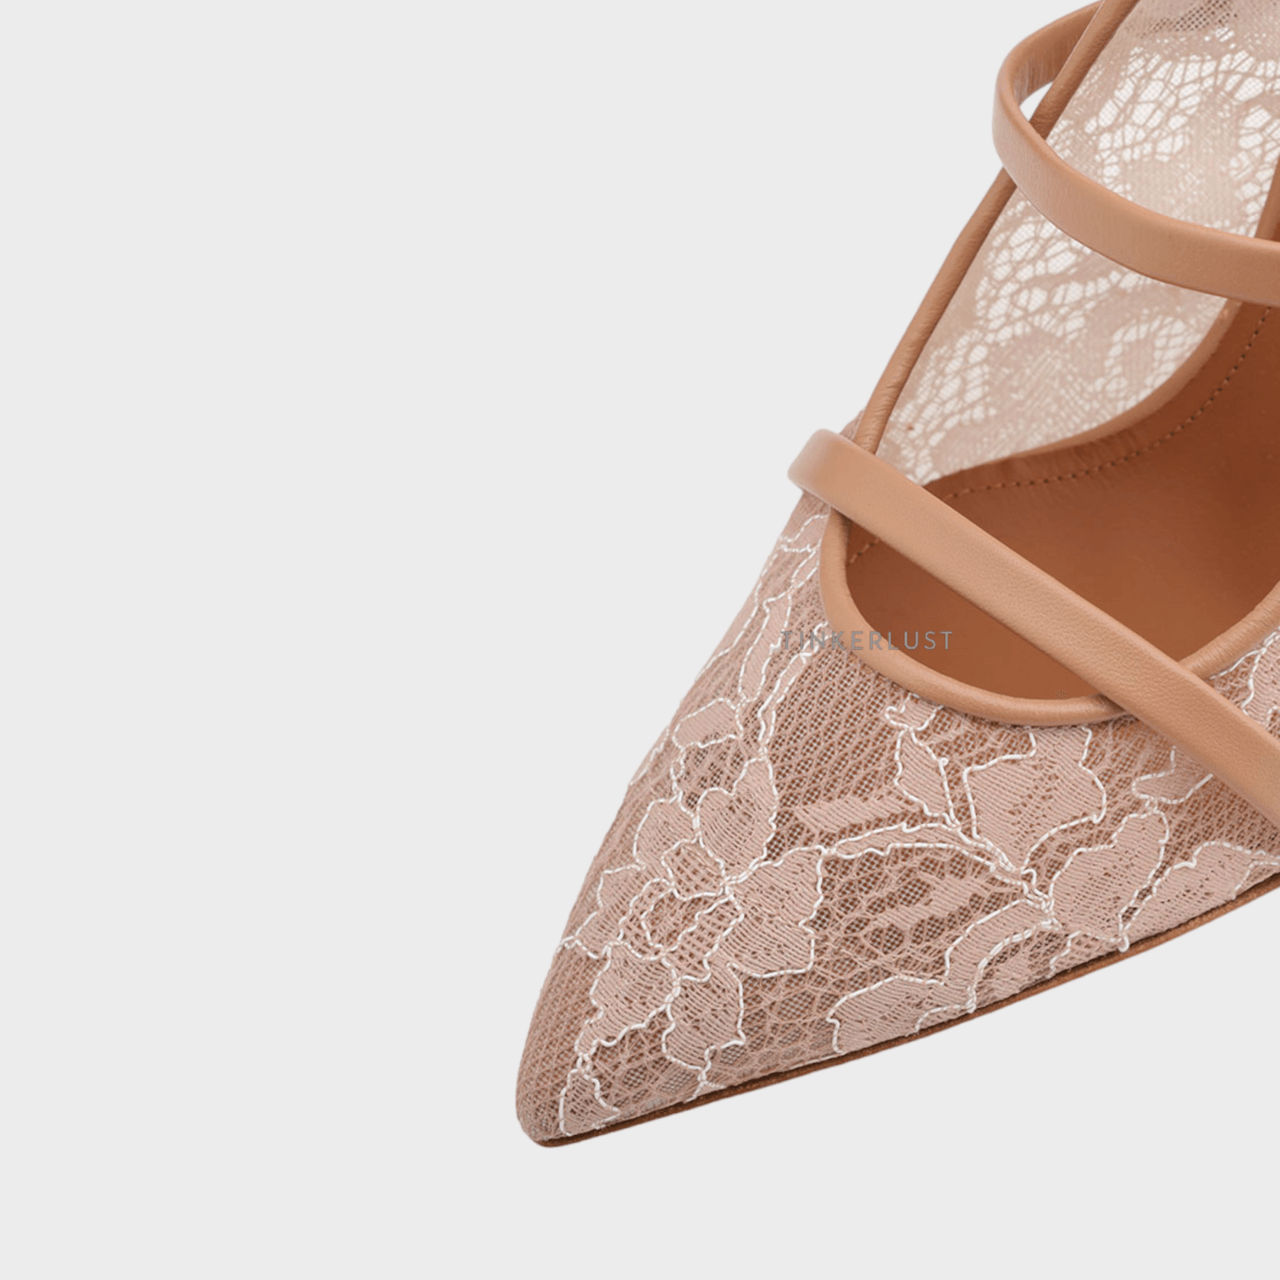 MALONE SOULIERS Maureen Lace Heeled Pumps 70mm in Mauve/Nude